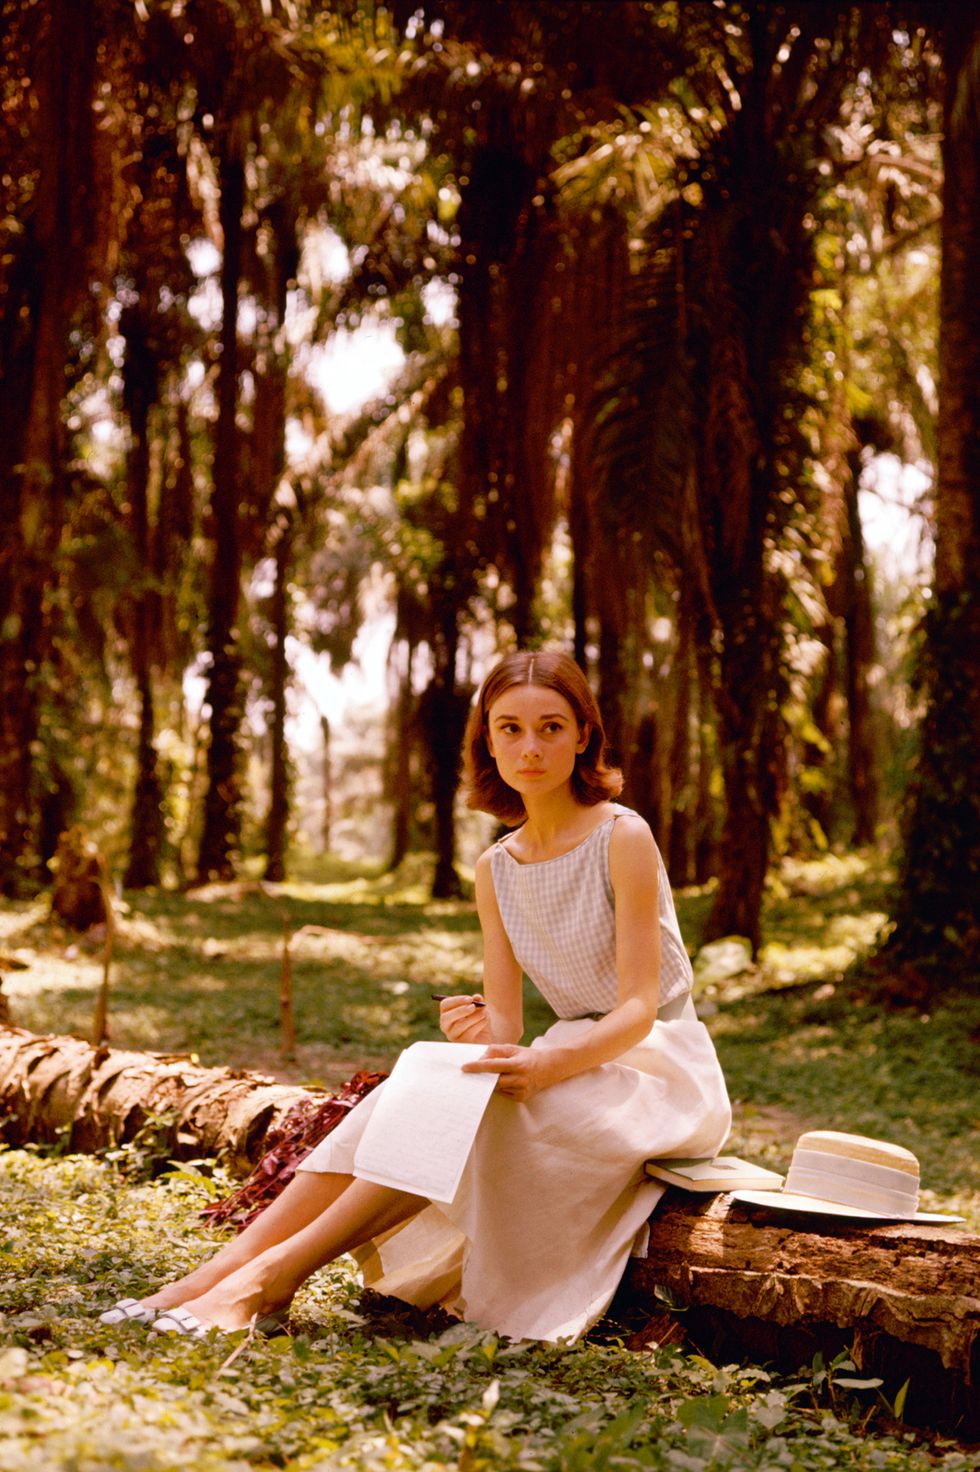 belgian born actress audrey hepburn 1929   1993, writing a letter in a palm grove, circa 1955 photo by silver screen collectionhulton archivegetty images